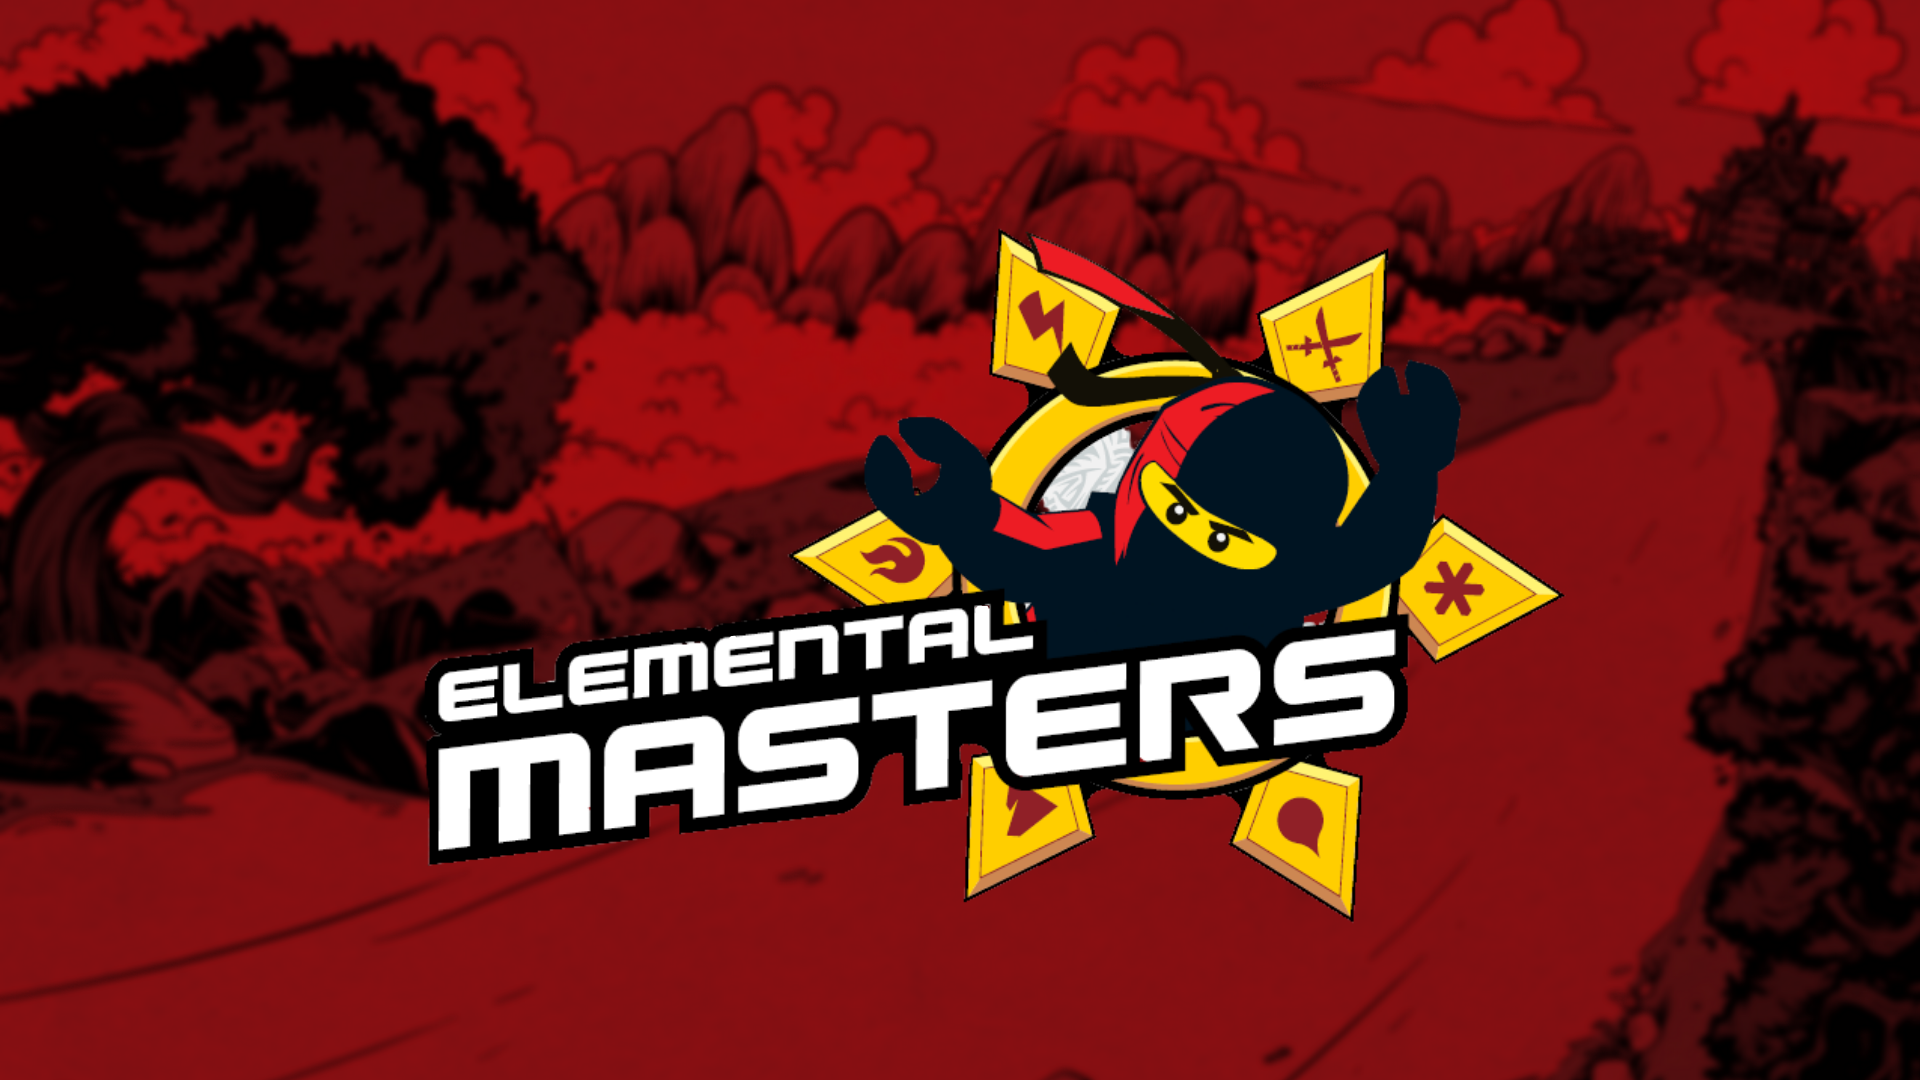 Elemental Masters Show Graphic